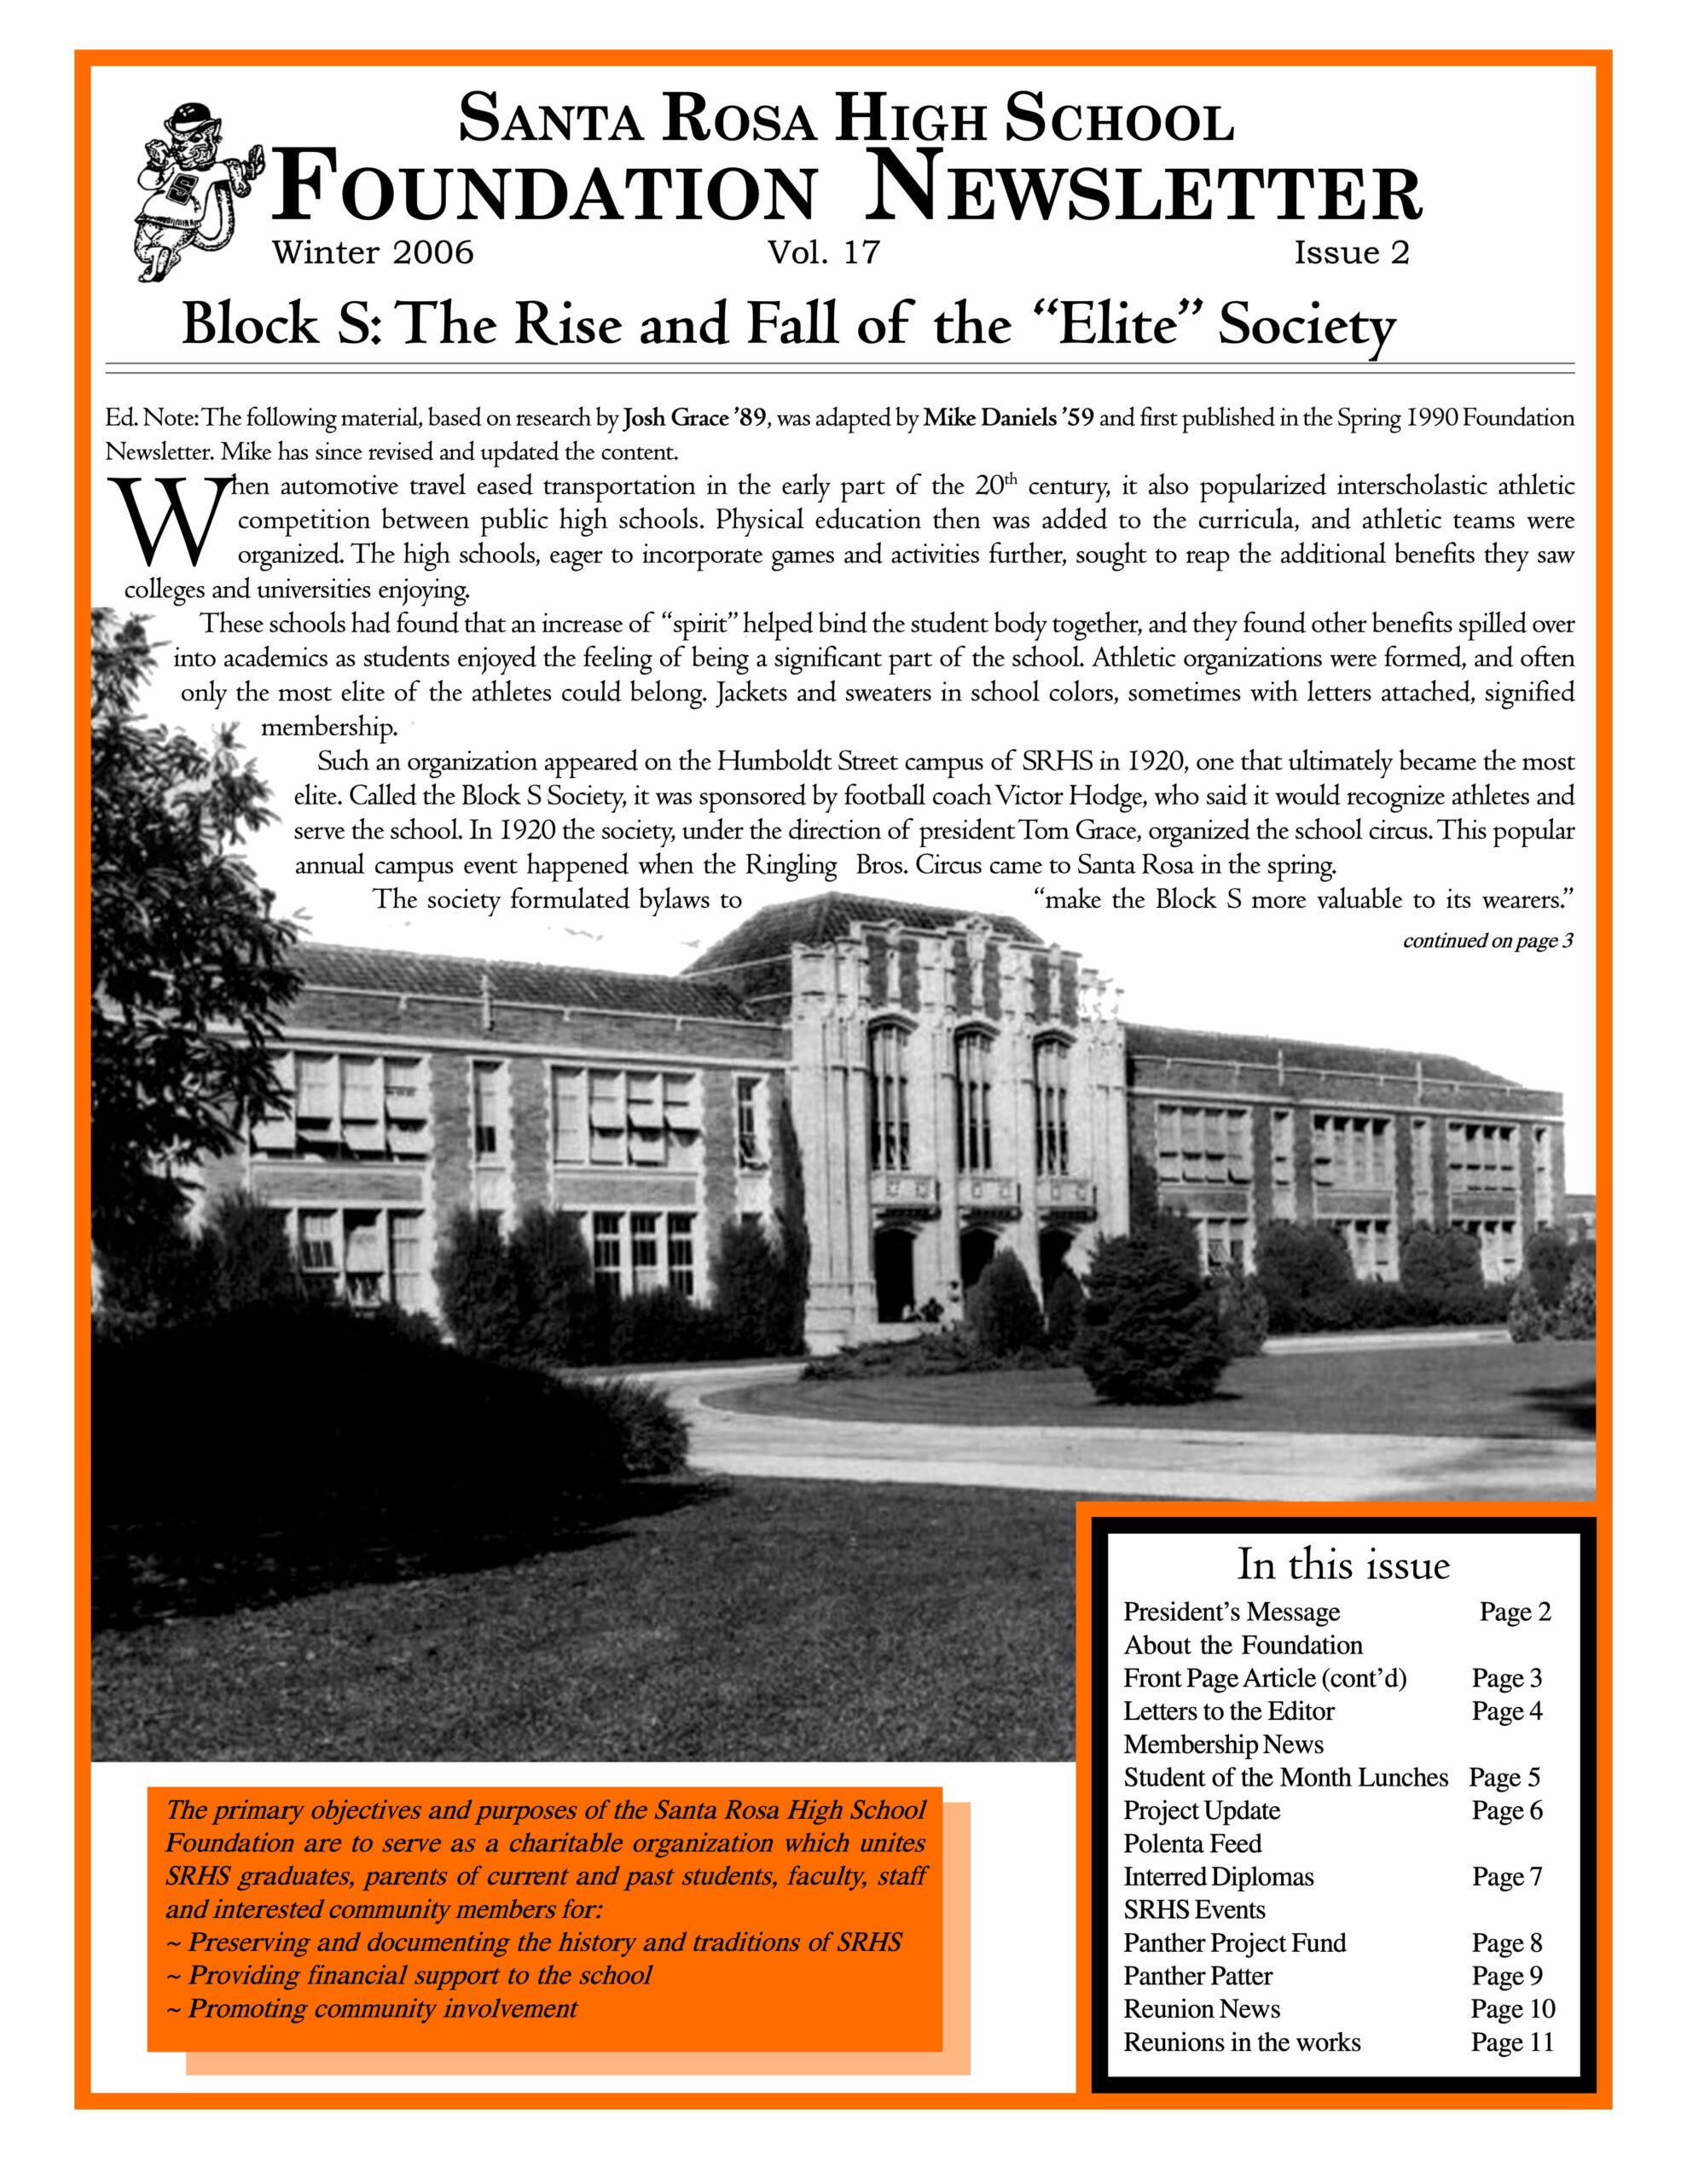 Newsletter front page - Winter 2006